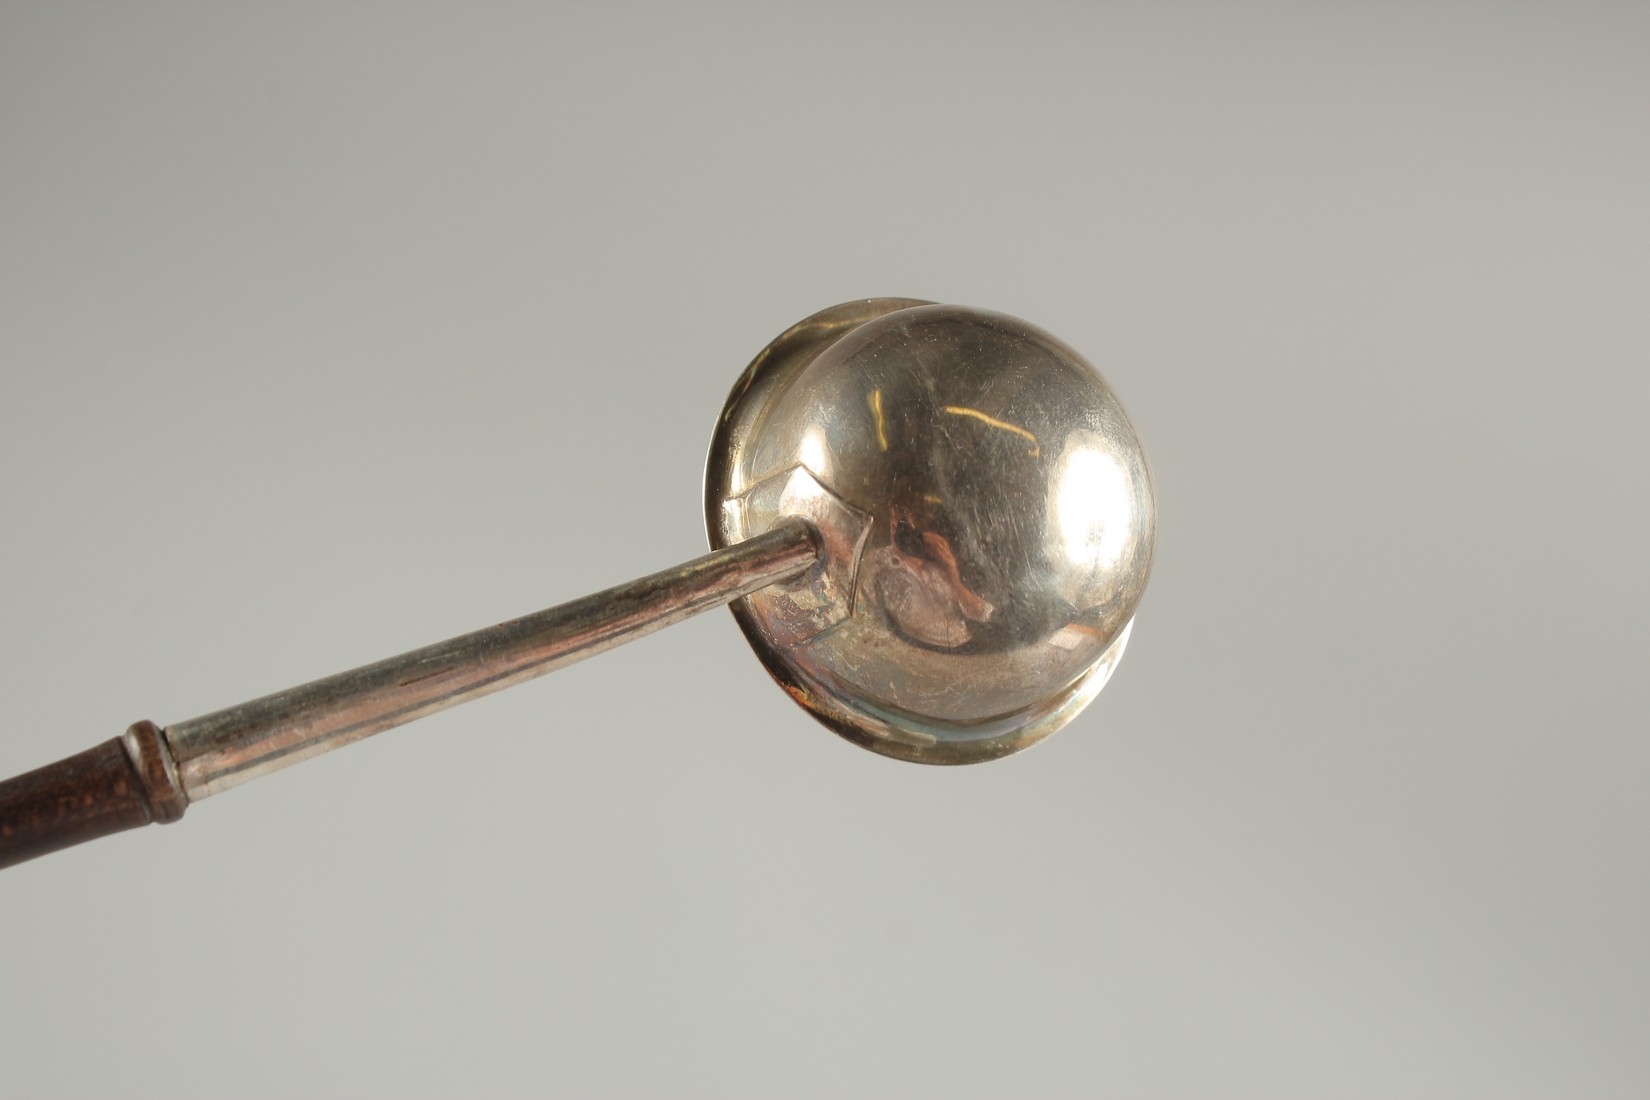 A GEORGE III SILVER TODY LADLE with wooden handle. Edinburgh, circa. 1800. - Image 3 of 4